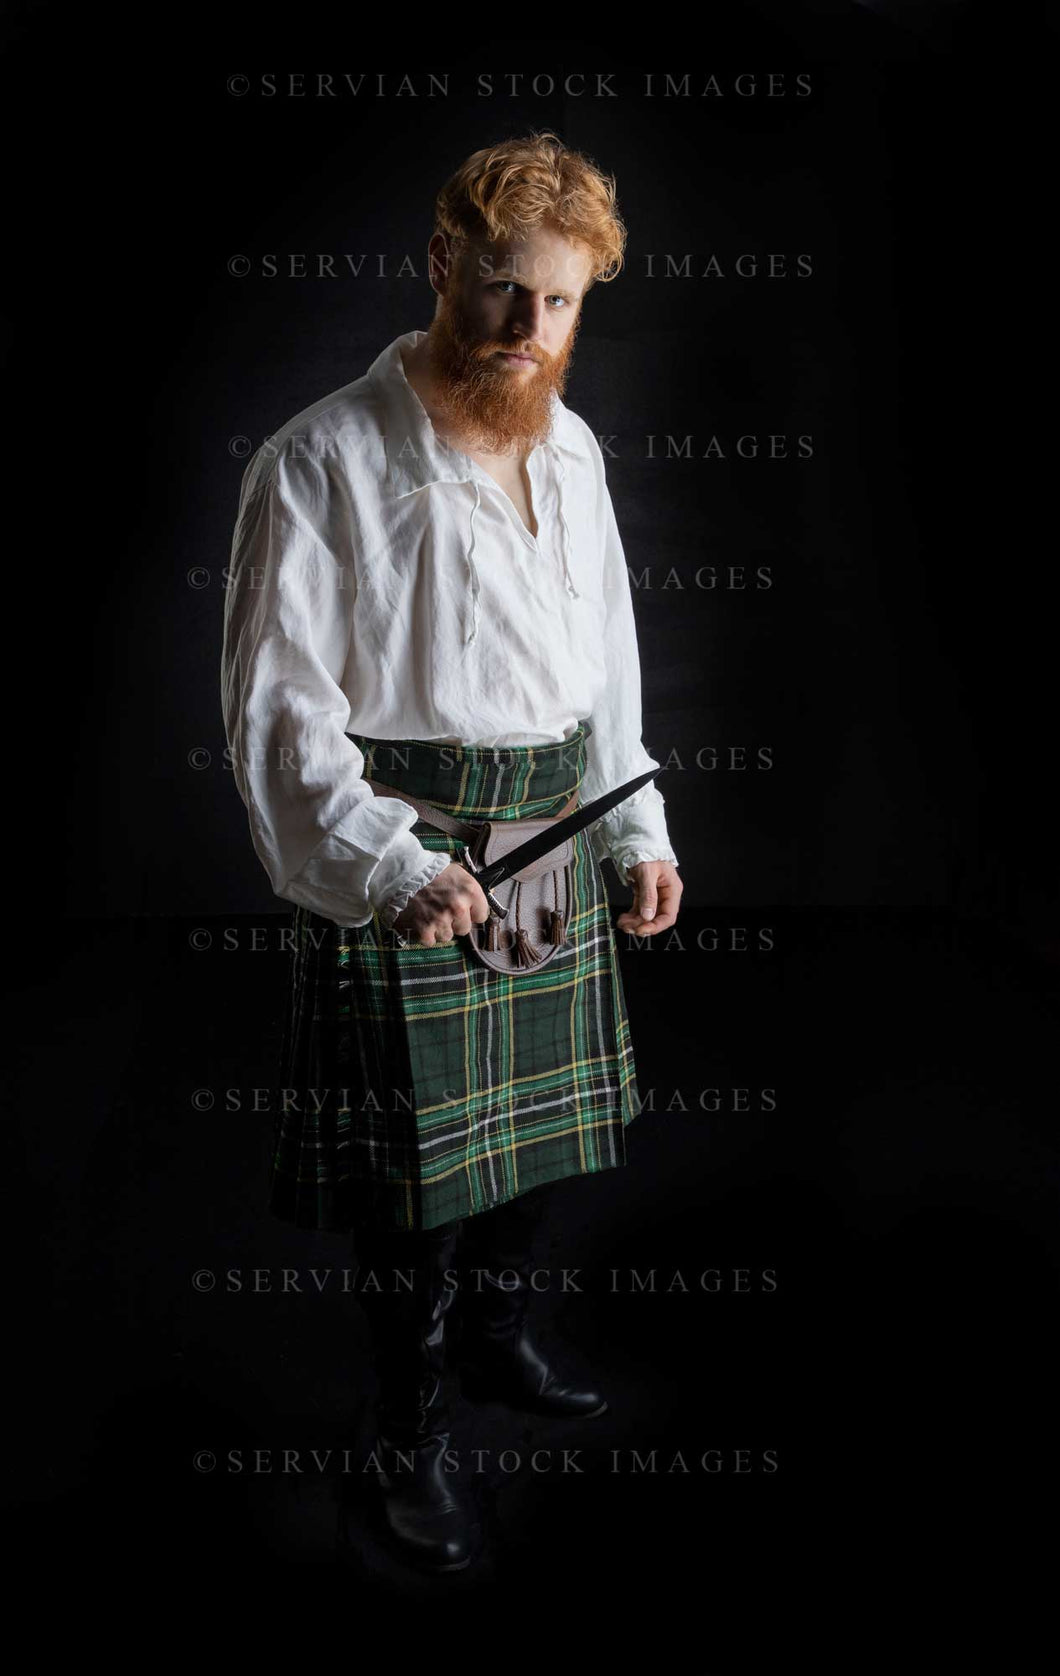 Scotsman with red hair and beard wearing a kilt and linen shirt against a black backdrop (Luke 3225)